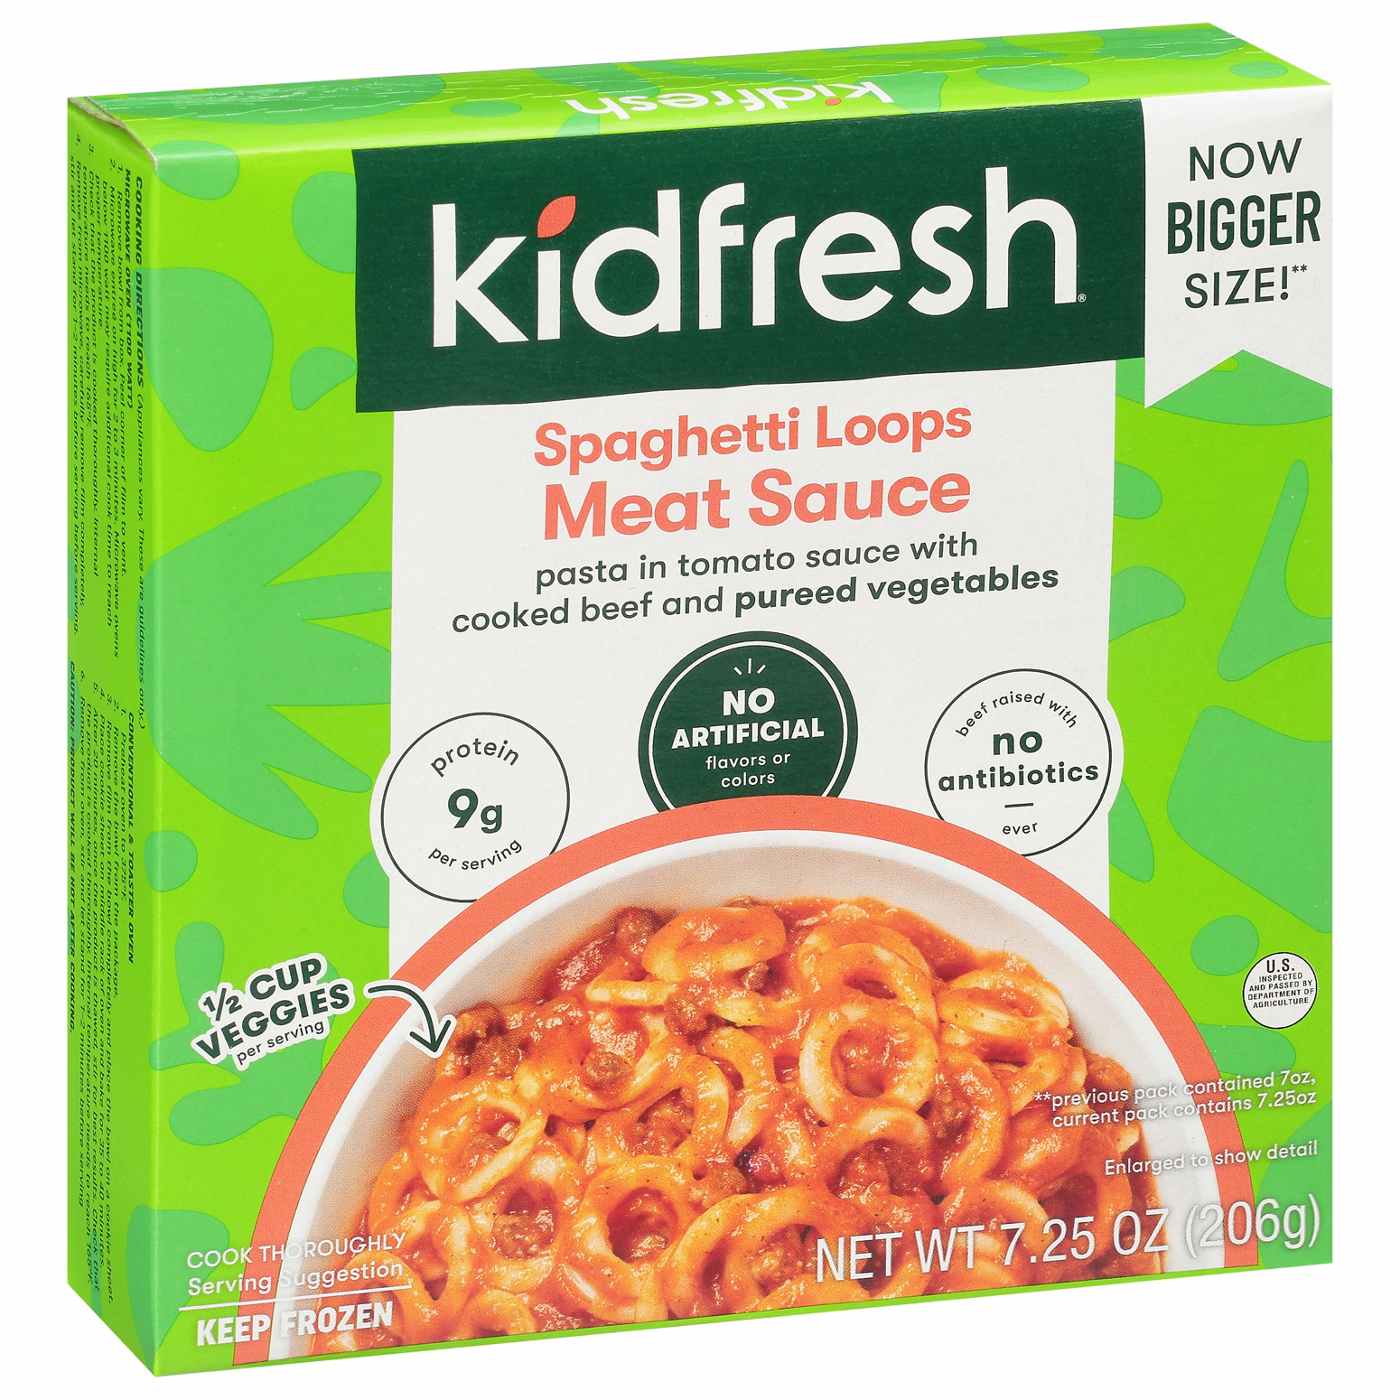 Kidfresh Spaghetti Loops in Meat Sauce Frozen Meal; image 2 of 2